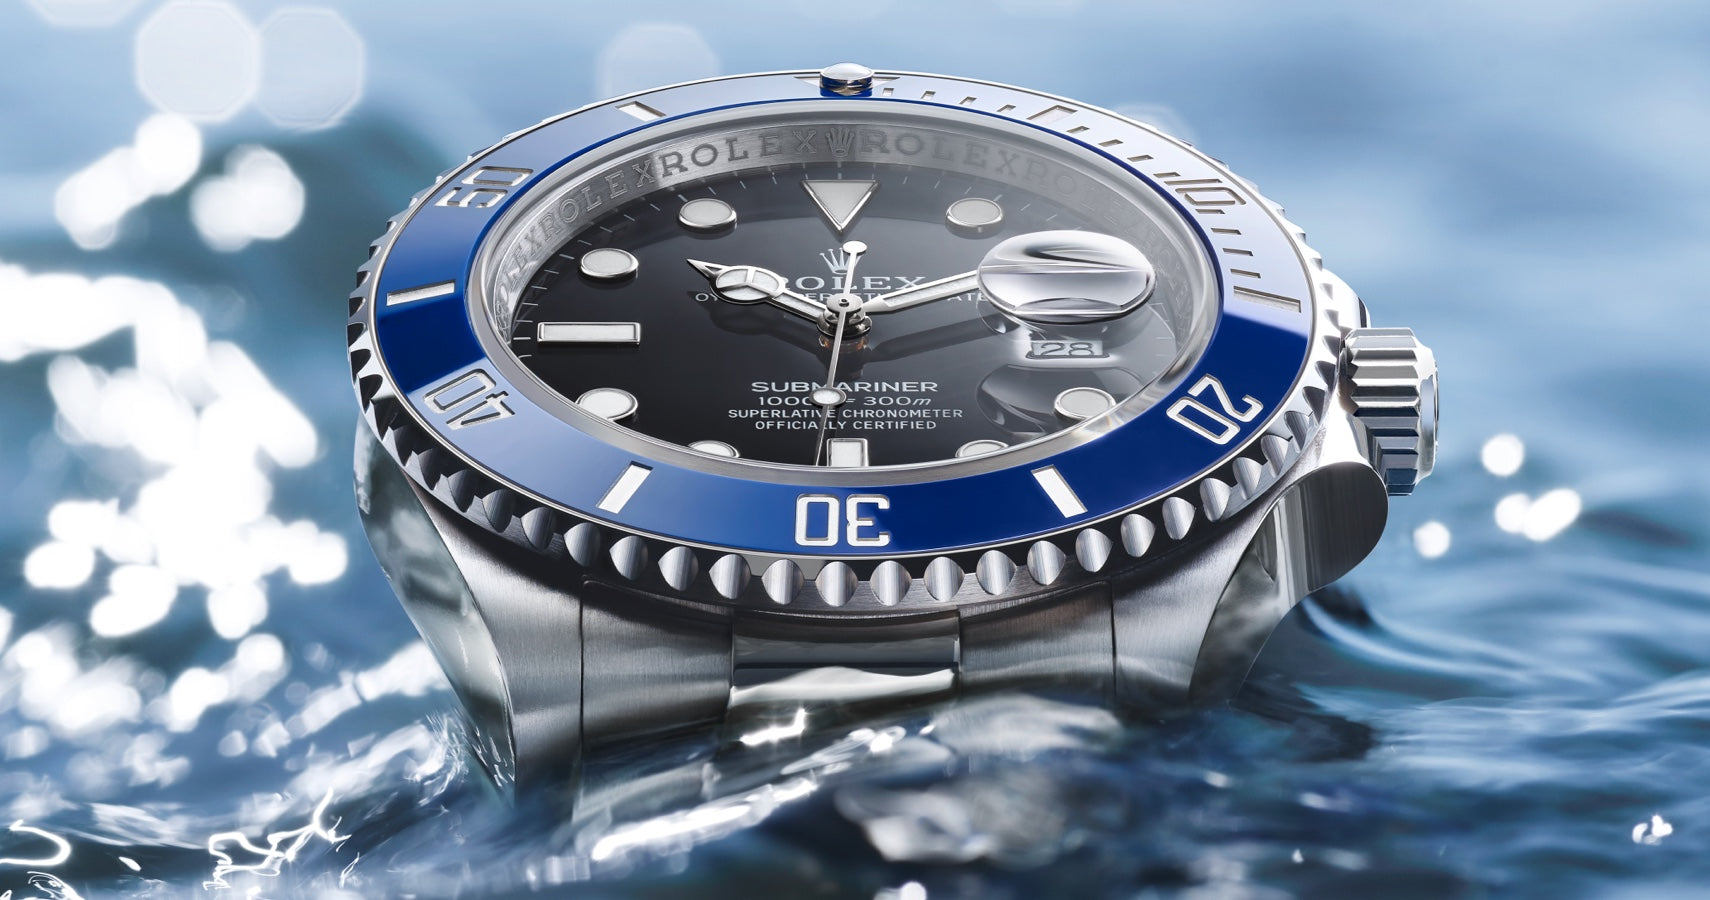 The reference among divers’ watches | Howard Fine Jewellers